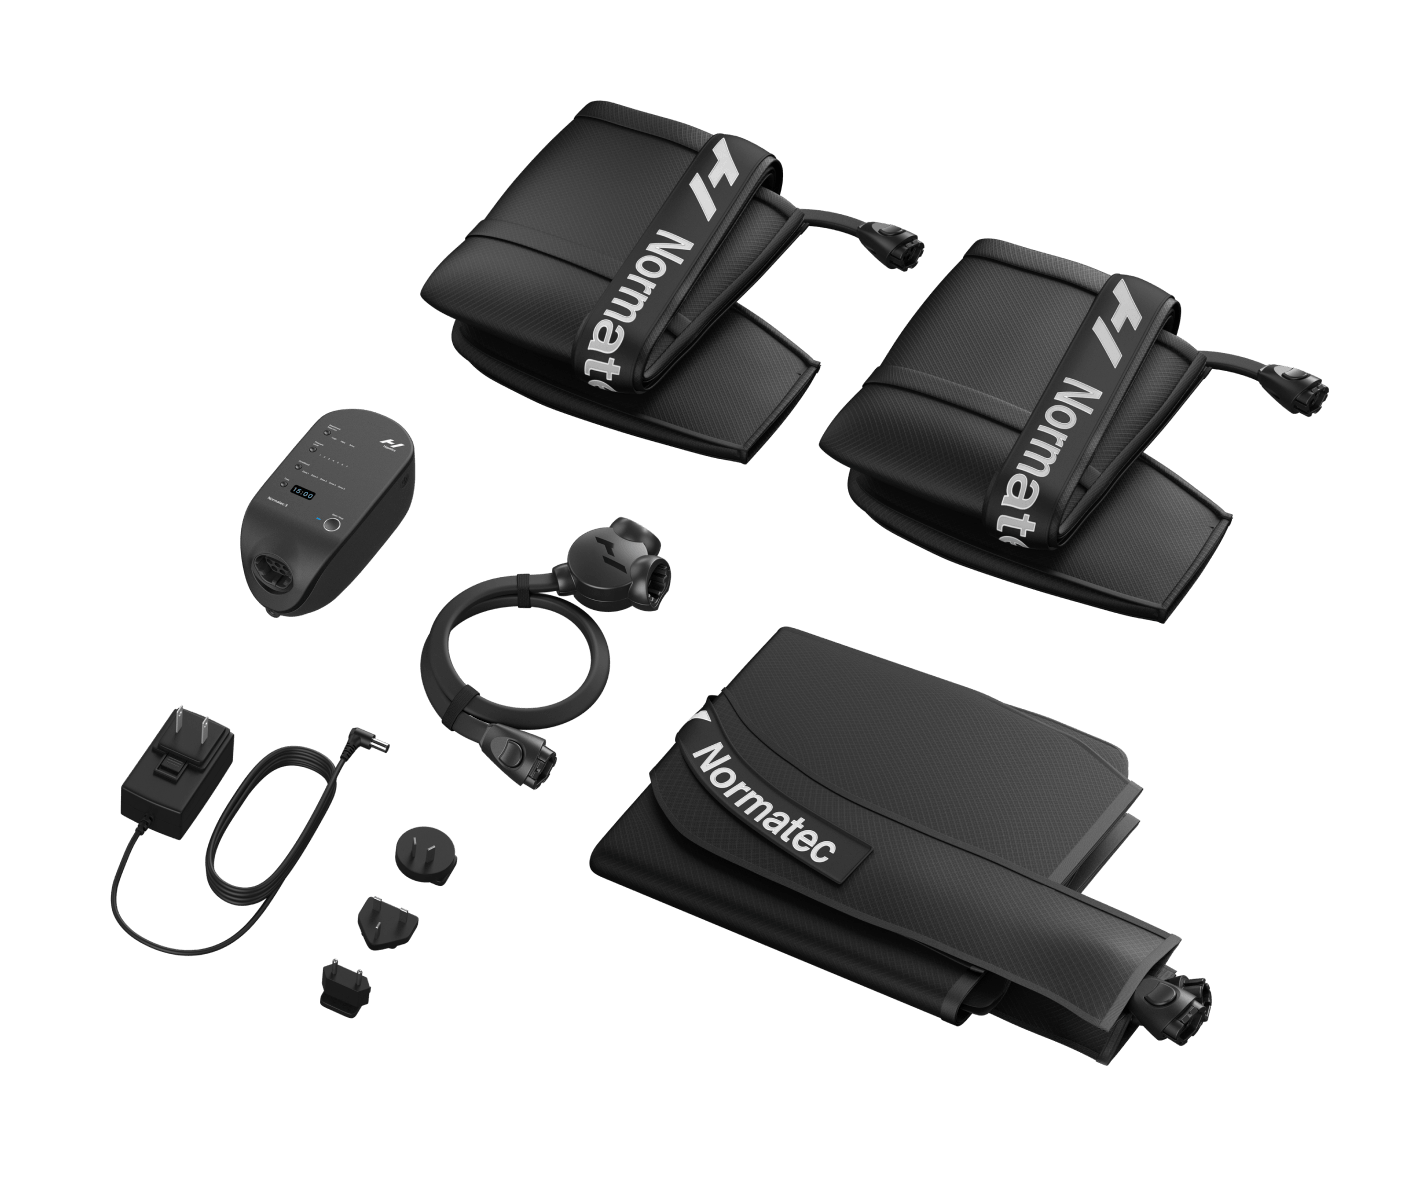 Normatec 3 Leg + Hip Recovery - Recovery gear